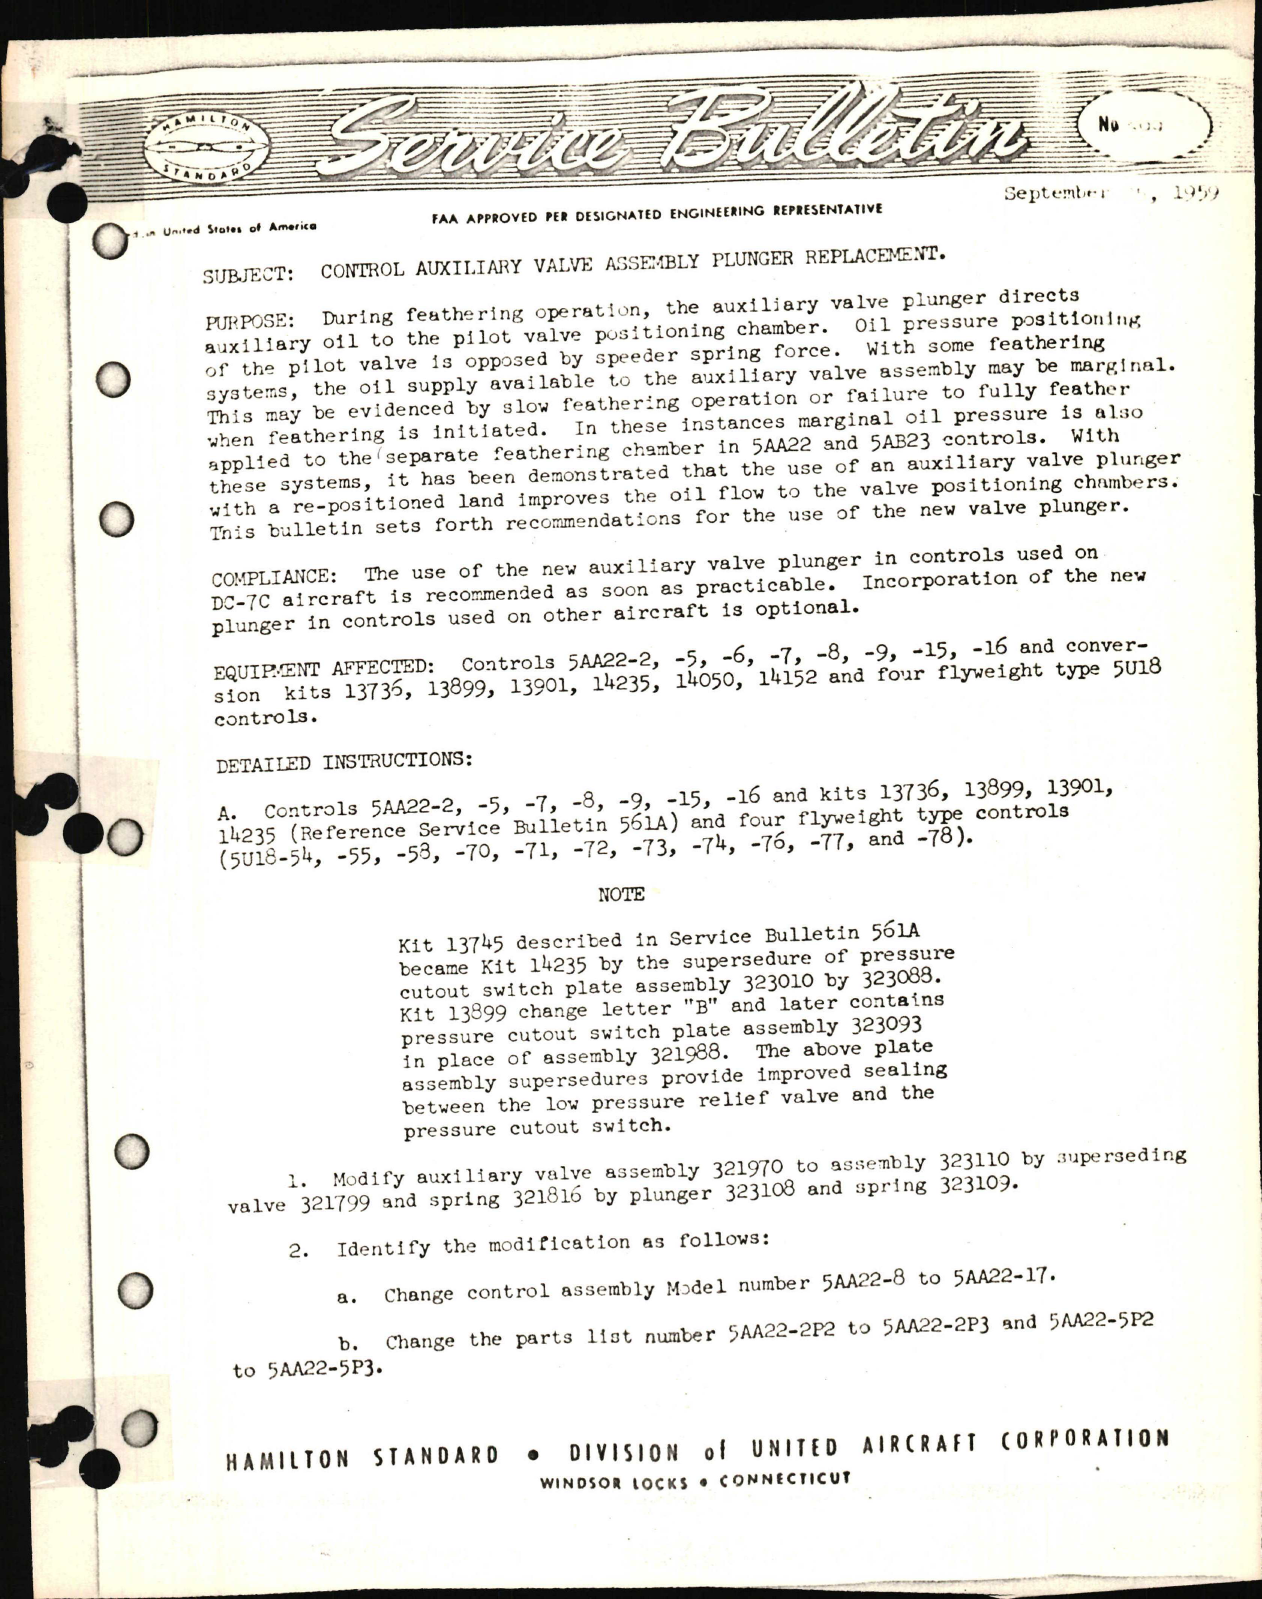 Sample page 1 from AirCorps Library document: Control Auxiliary Valve Assembly Plunger Replacement